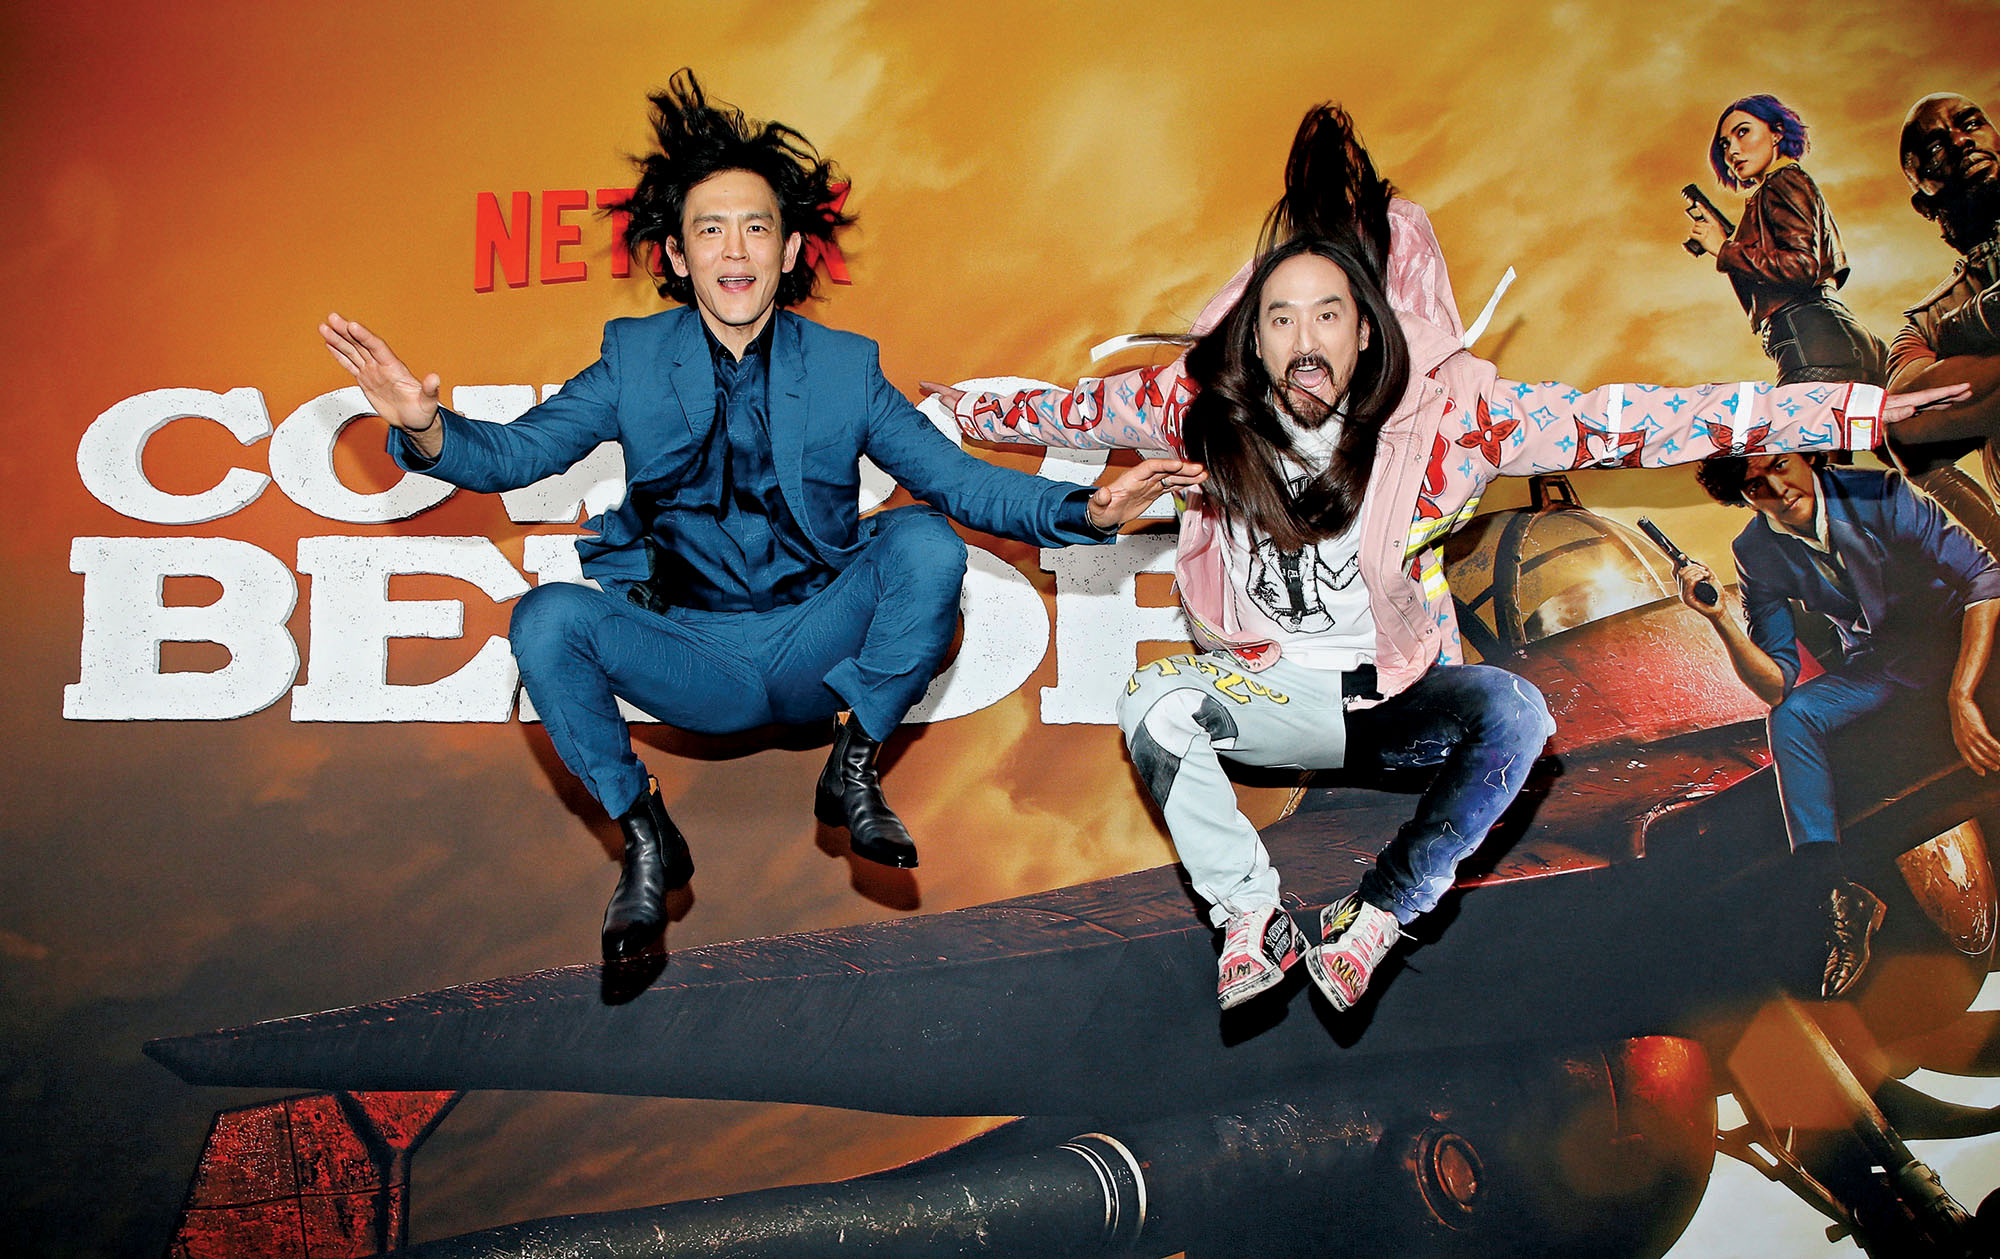 John Cho and Steve Aoki attend Netflix's "Cowboy Bebop" Premiere at Goya Studios on November 11, 2021 in Los Angeles, California. (Photo by Phillip Faraone/Getty Images for Netflix)